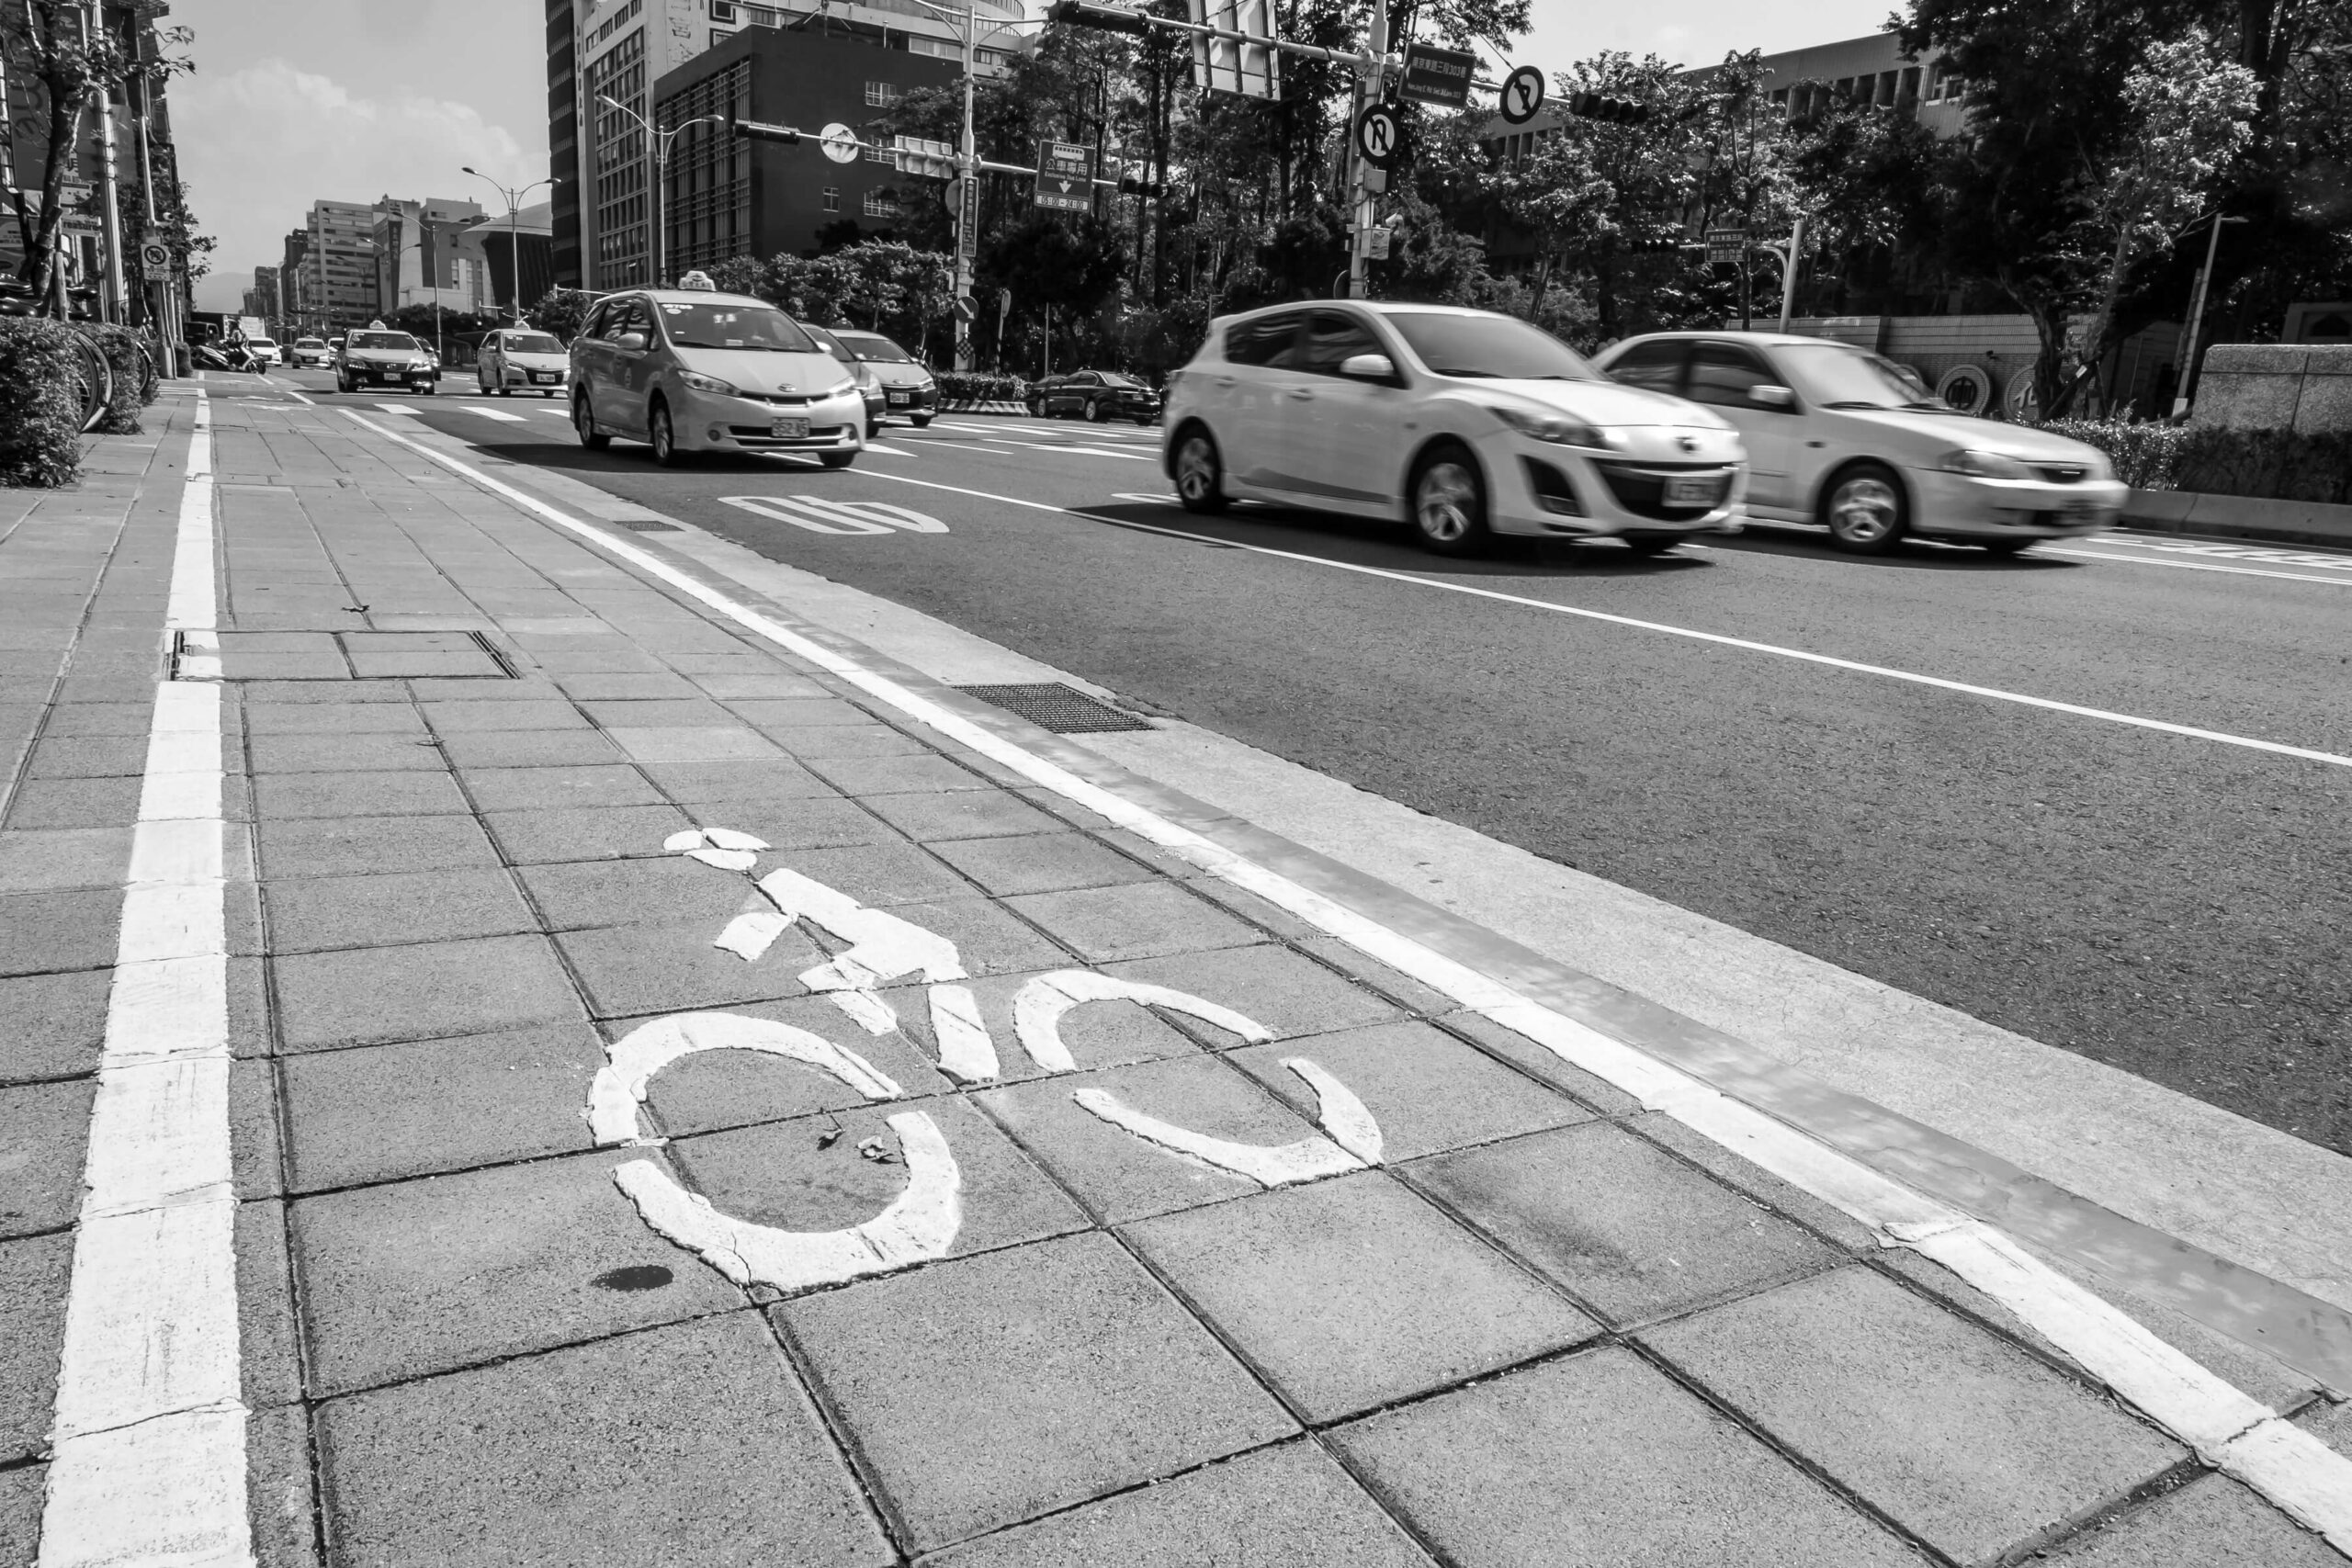 Inadequate separation between drivers and cyclists plays a role in many bicycle accidents